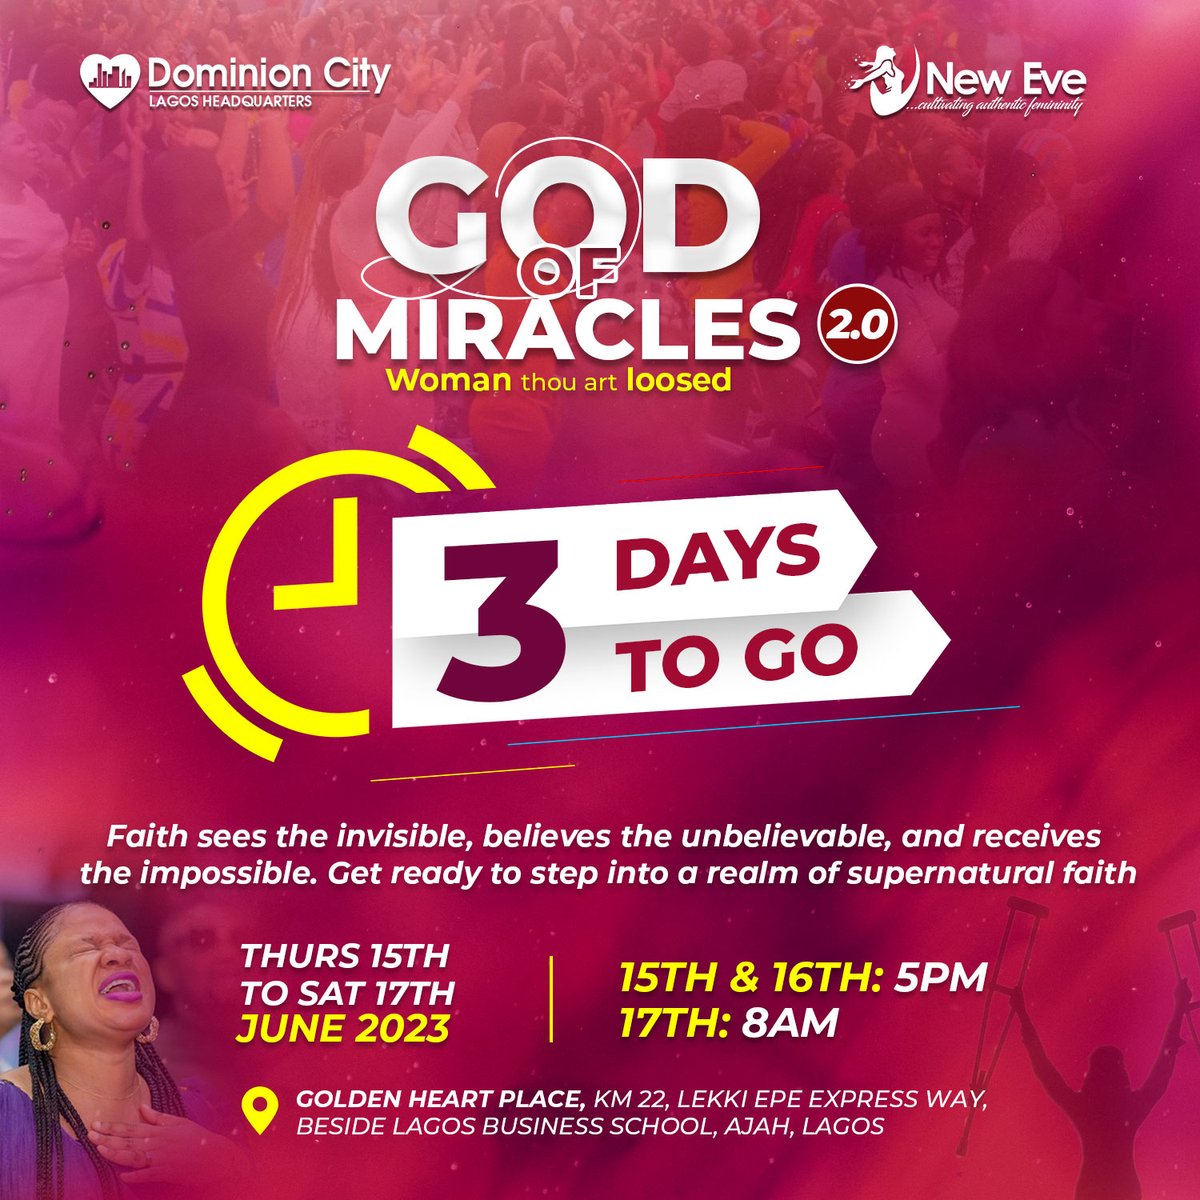 God of Miracle 2.0 is 3days to go!!

Sisters get ready!

Whatever it is you are trusting God for don't miss this program.

Tell every woman you know, God's glory will be revealed like never before.

#DominionCity #DCLagosHQ #GodOfMiracles #NewEve